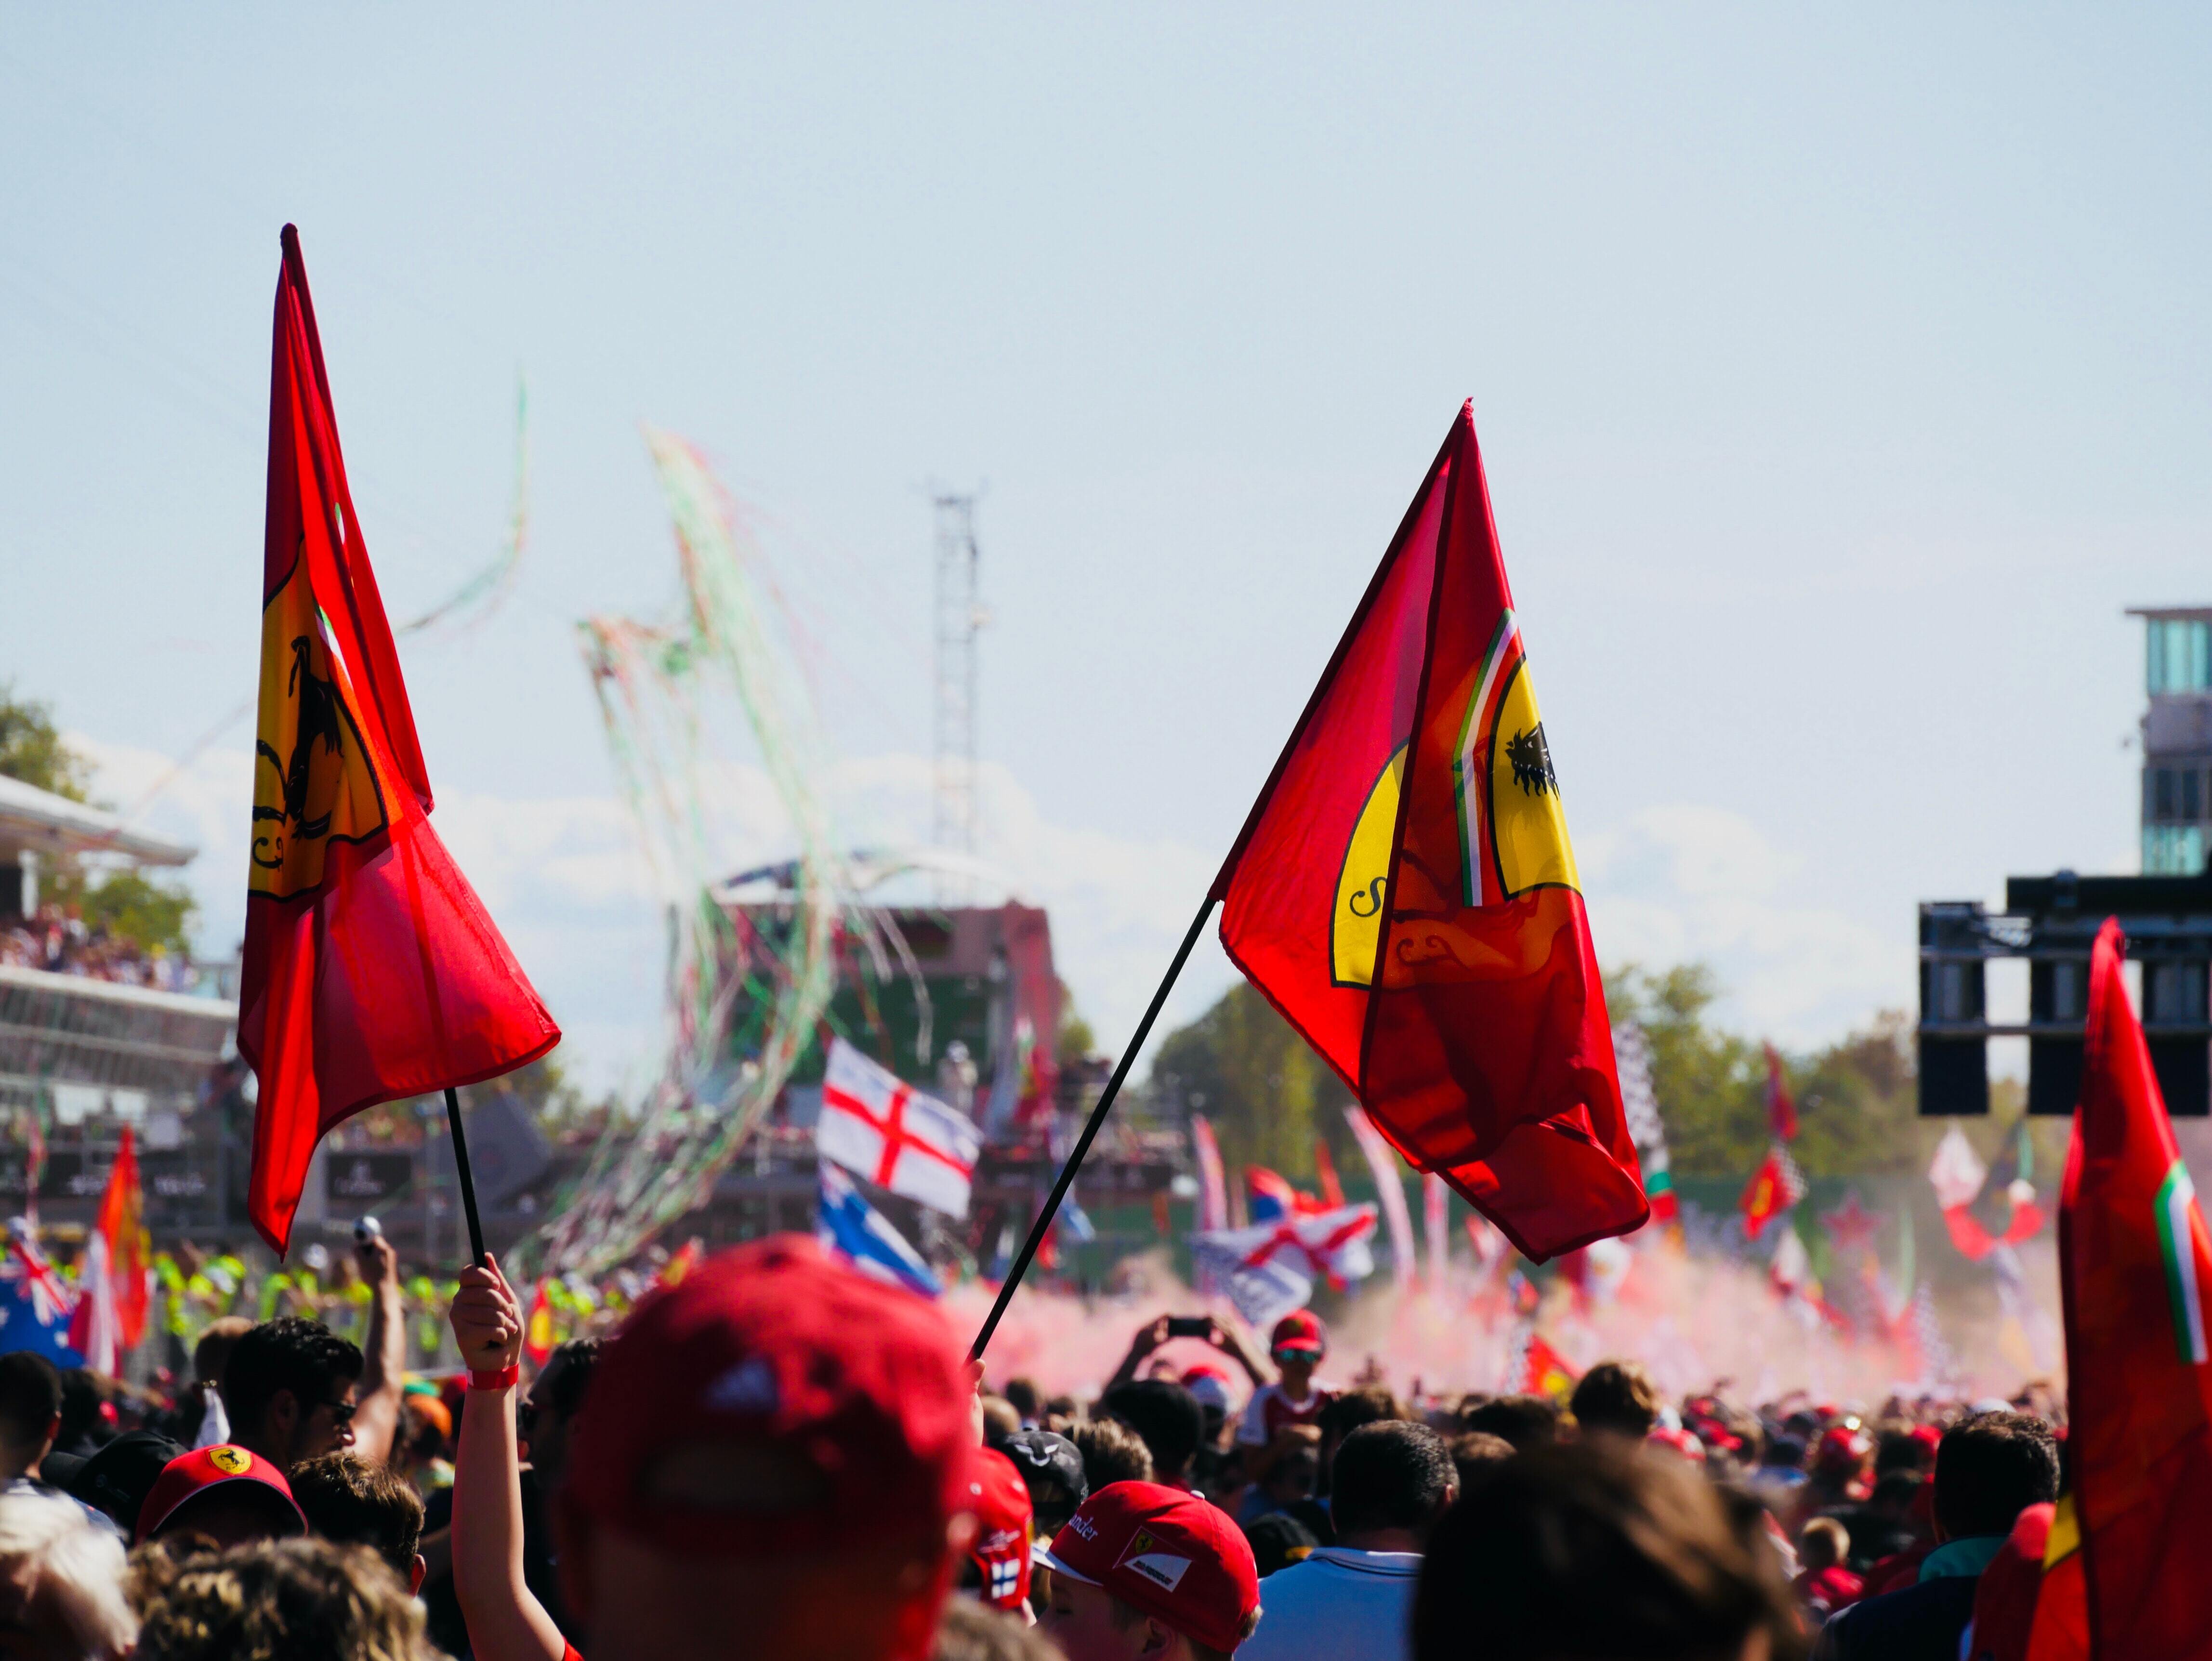 Ferrari fans celebrate during podium ceremony after the race